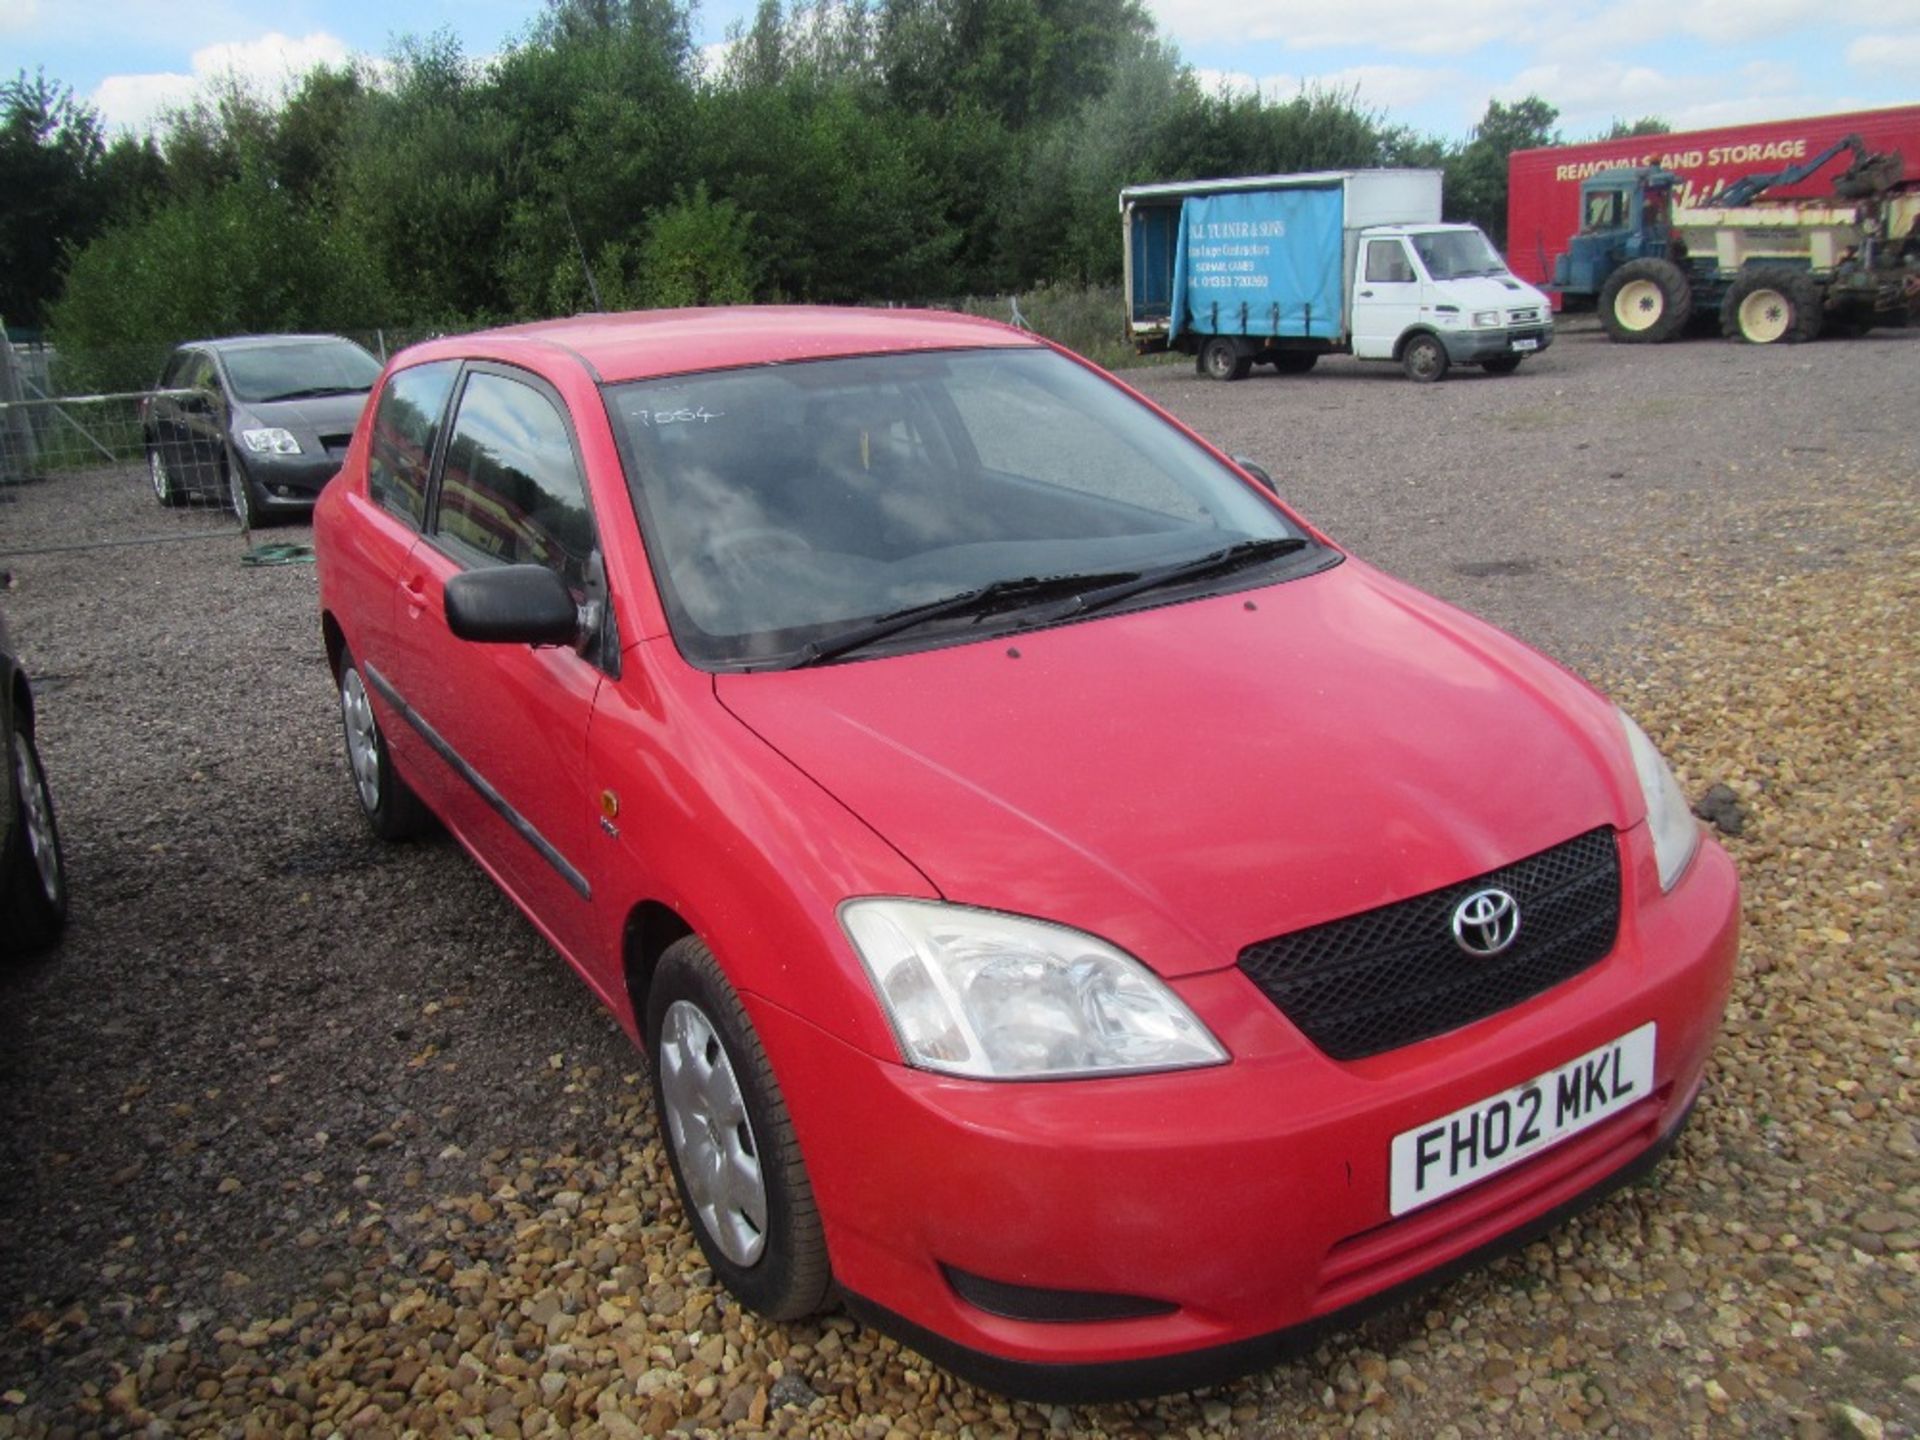 Toyota Corrola 1.4 Petrol. 1 Owner from new. V5 & Service History will be supplied Mileage: 165,382. - Image 3 of 6